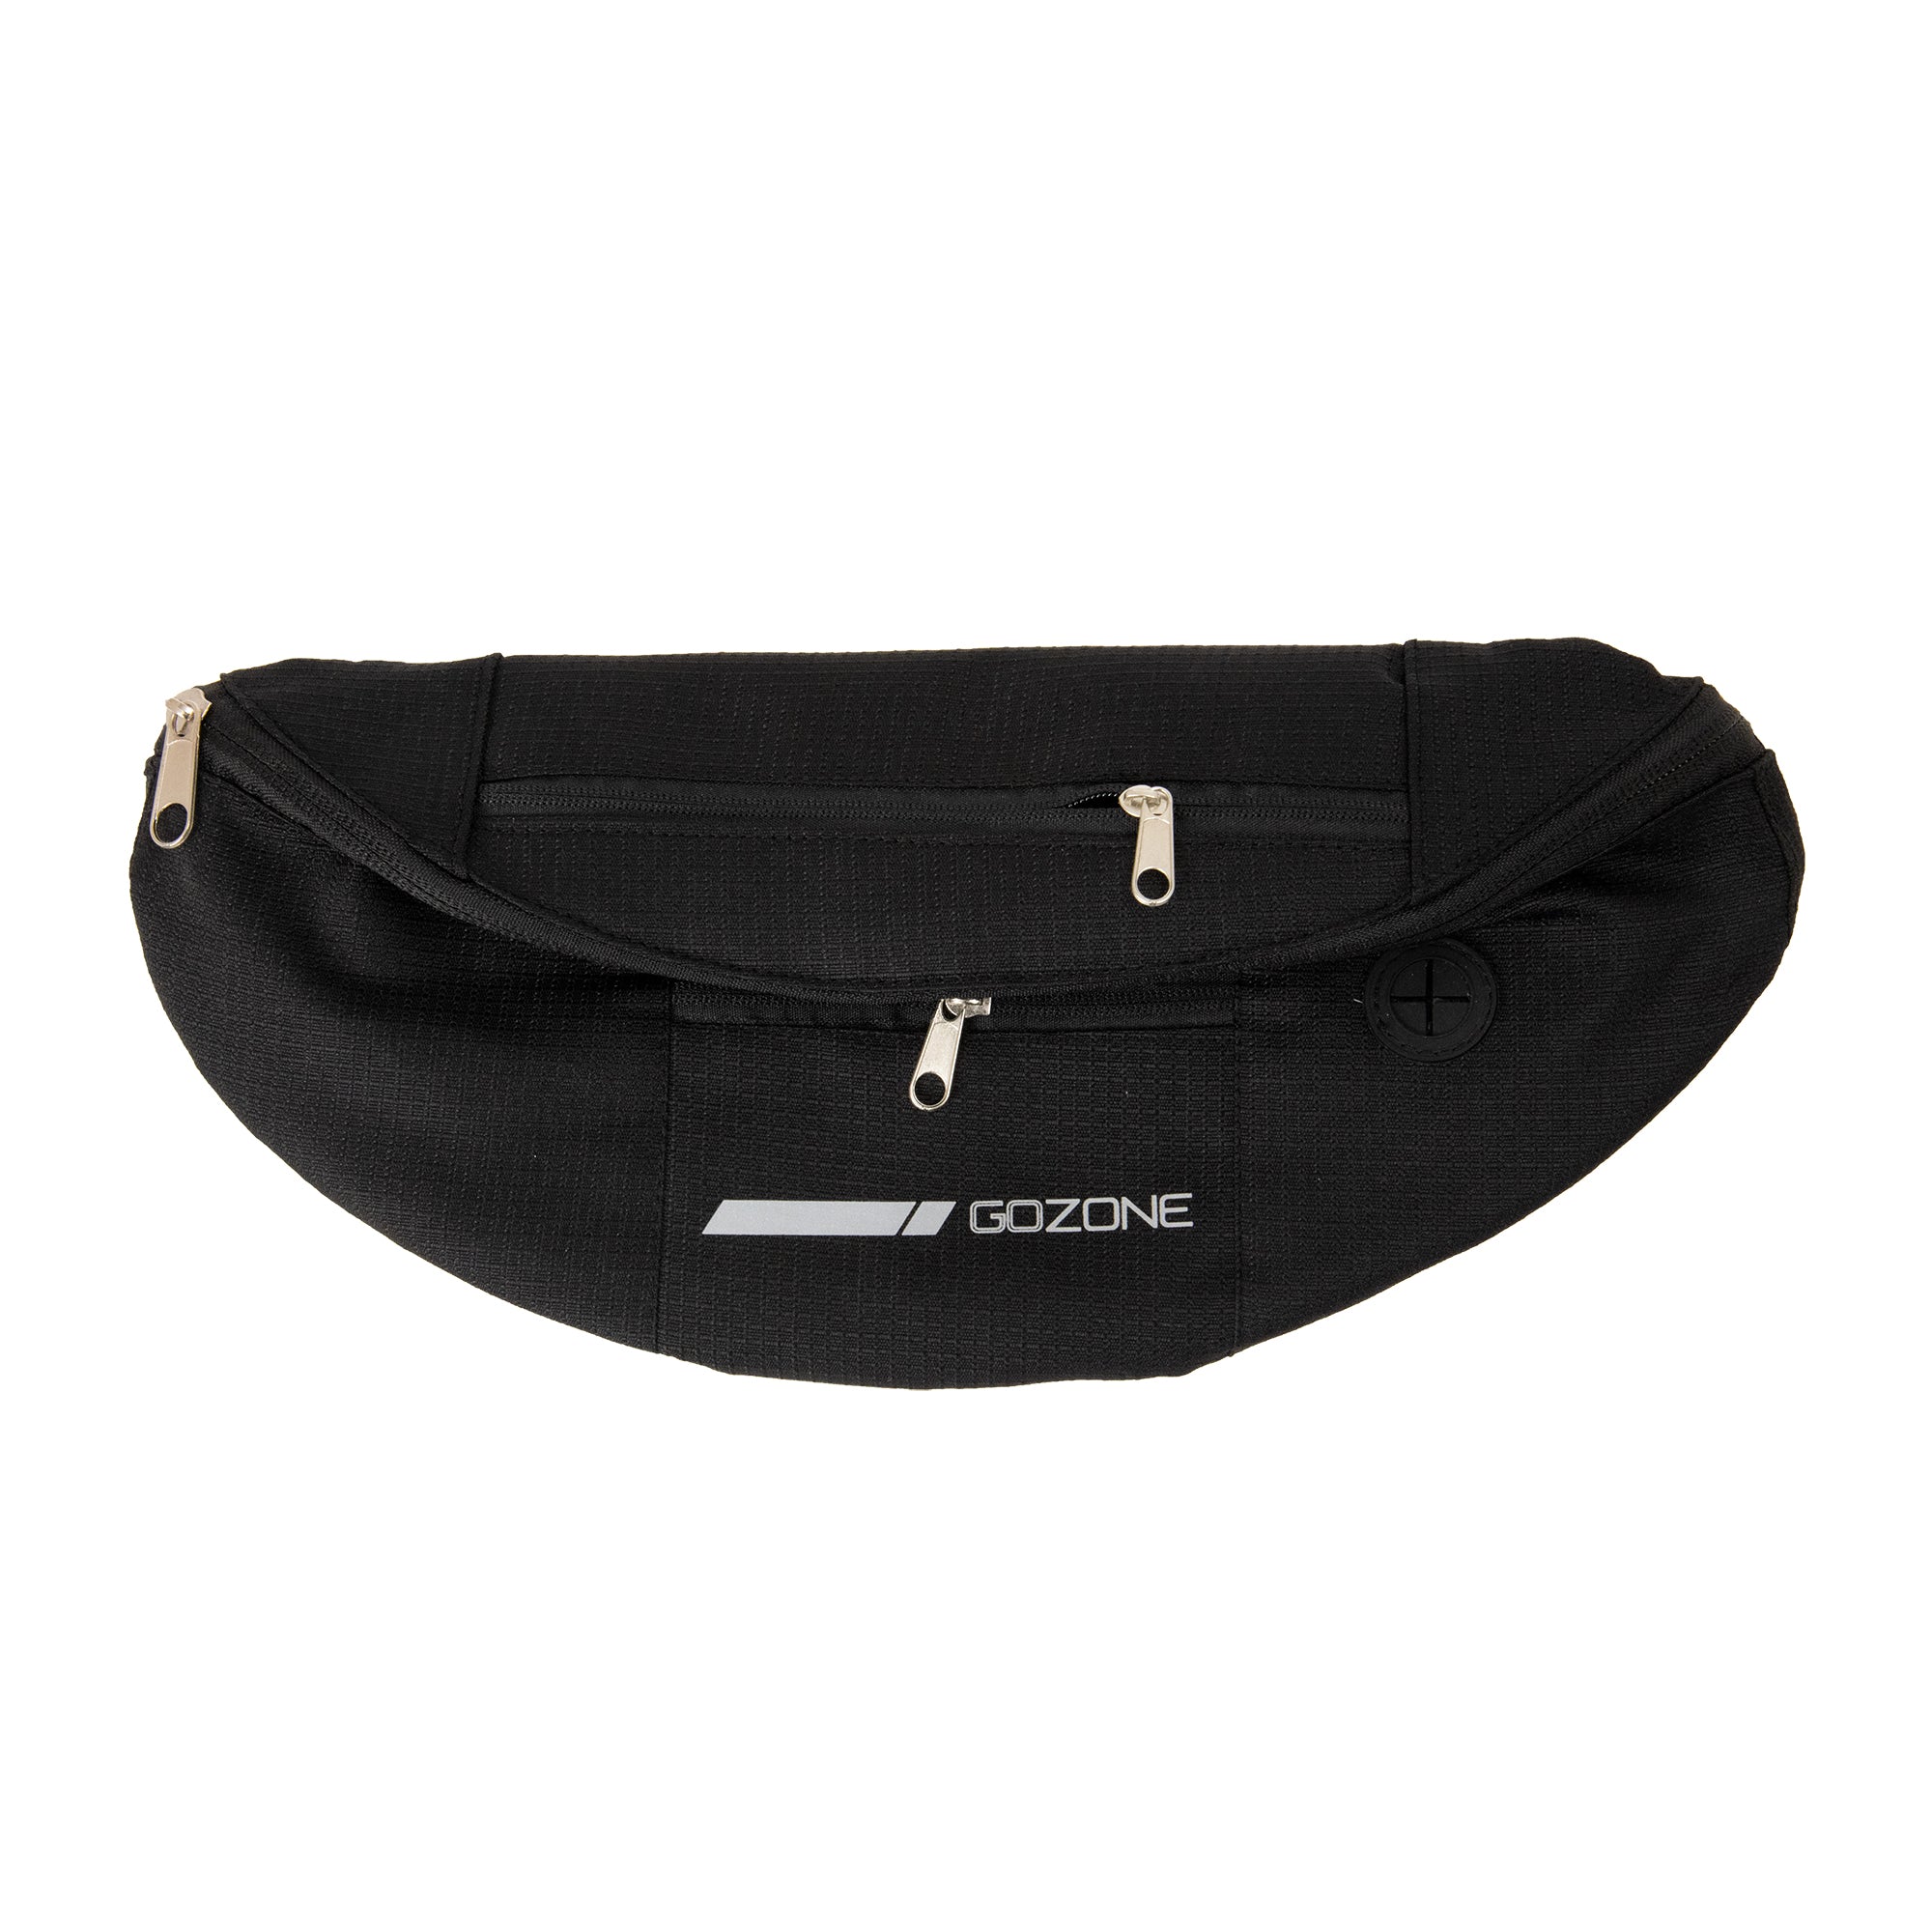 Where to Shop for a Plus Size Fanny Pack